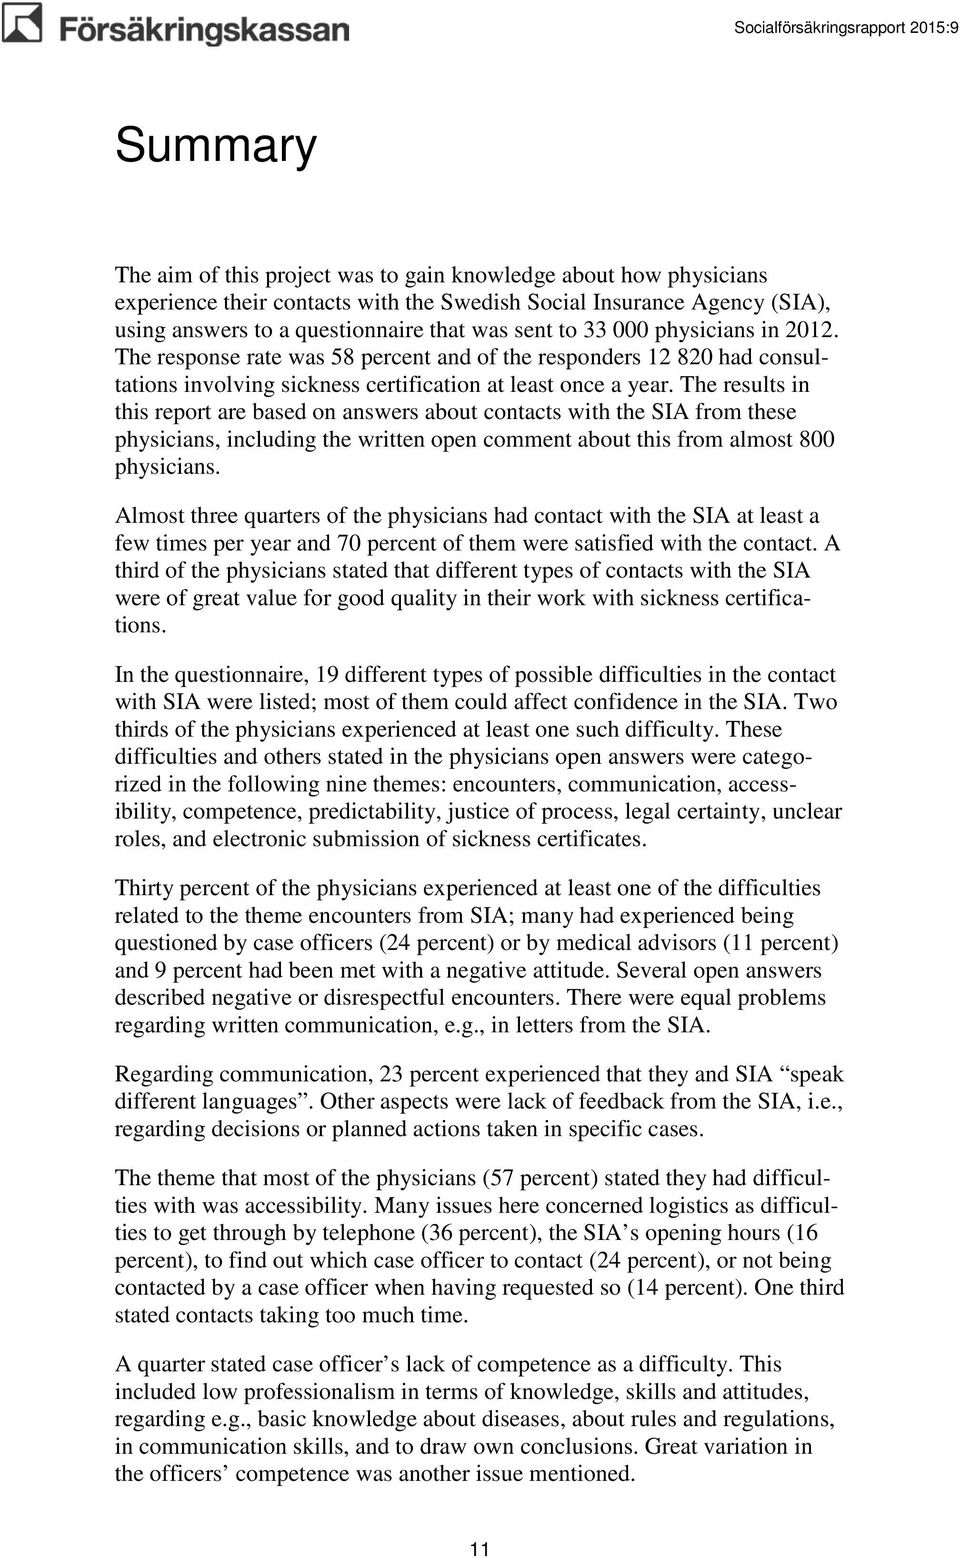 The results in this report are based on answers about contacts with the SIA from these physicians, including the written open comment about this from almost 800 physicians.